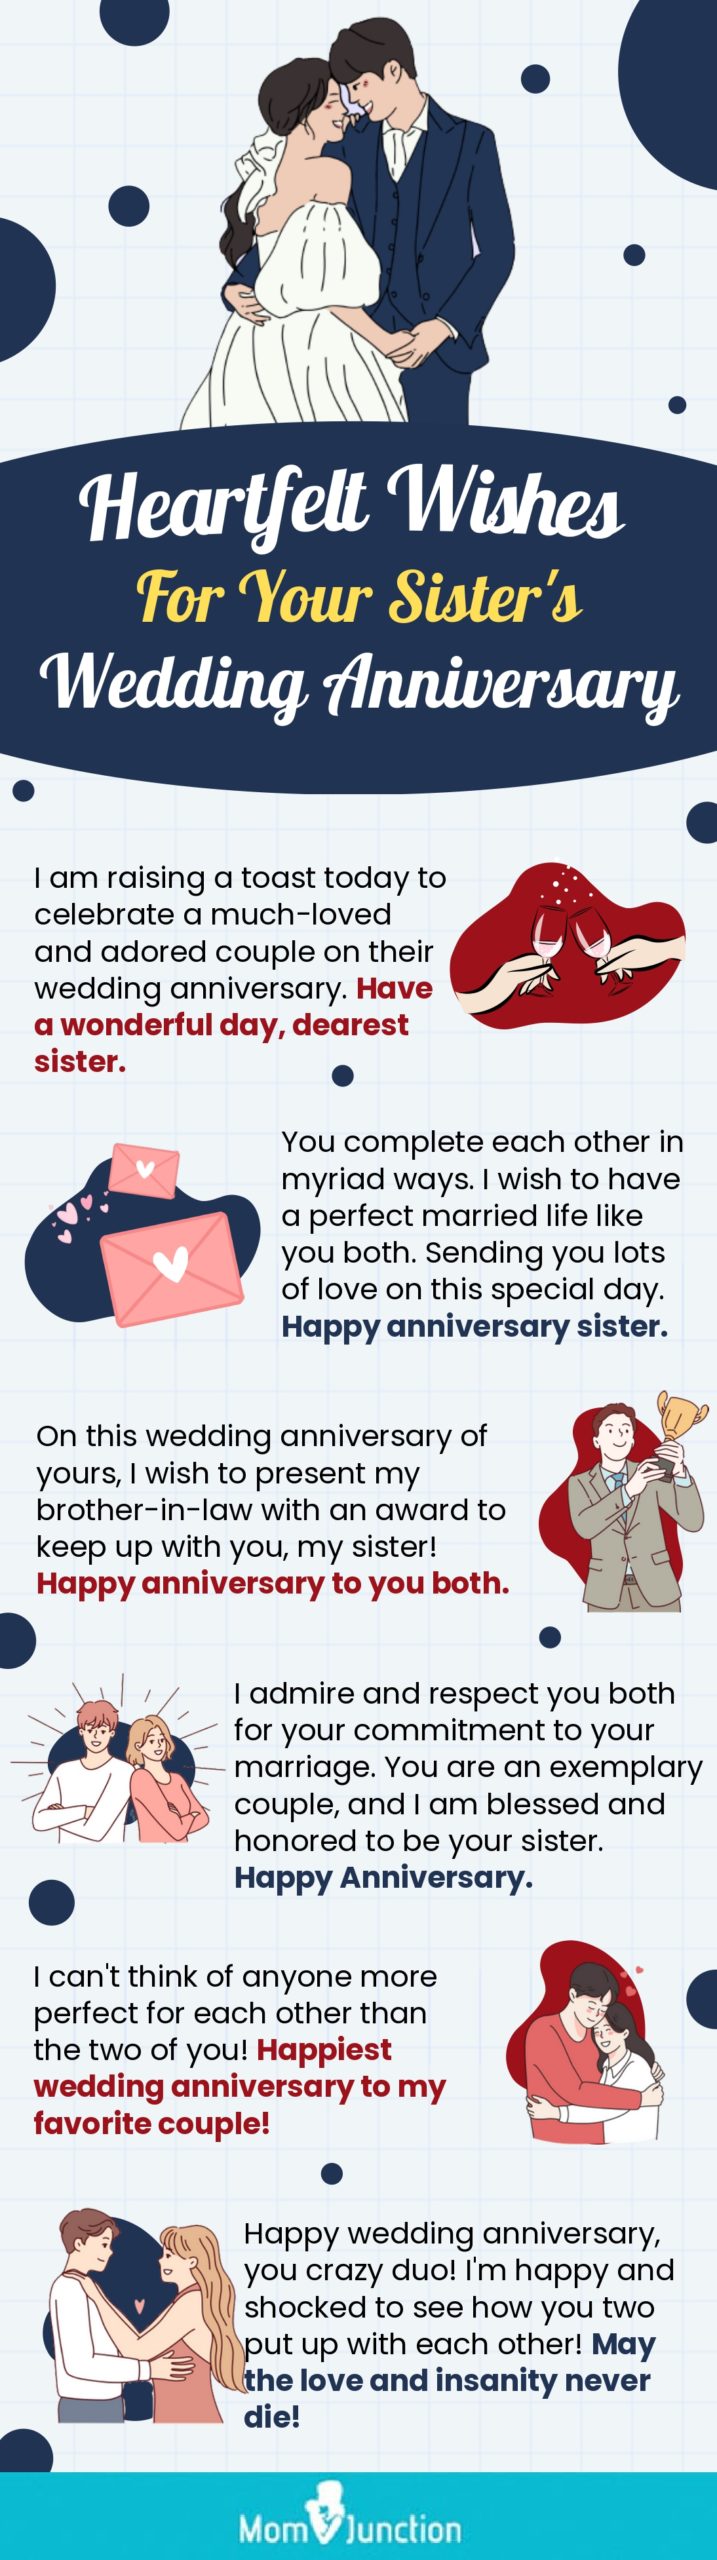 heartfelt wishes for your sister's wedding anniversary (infographic)